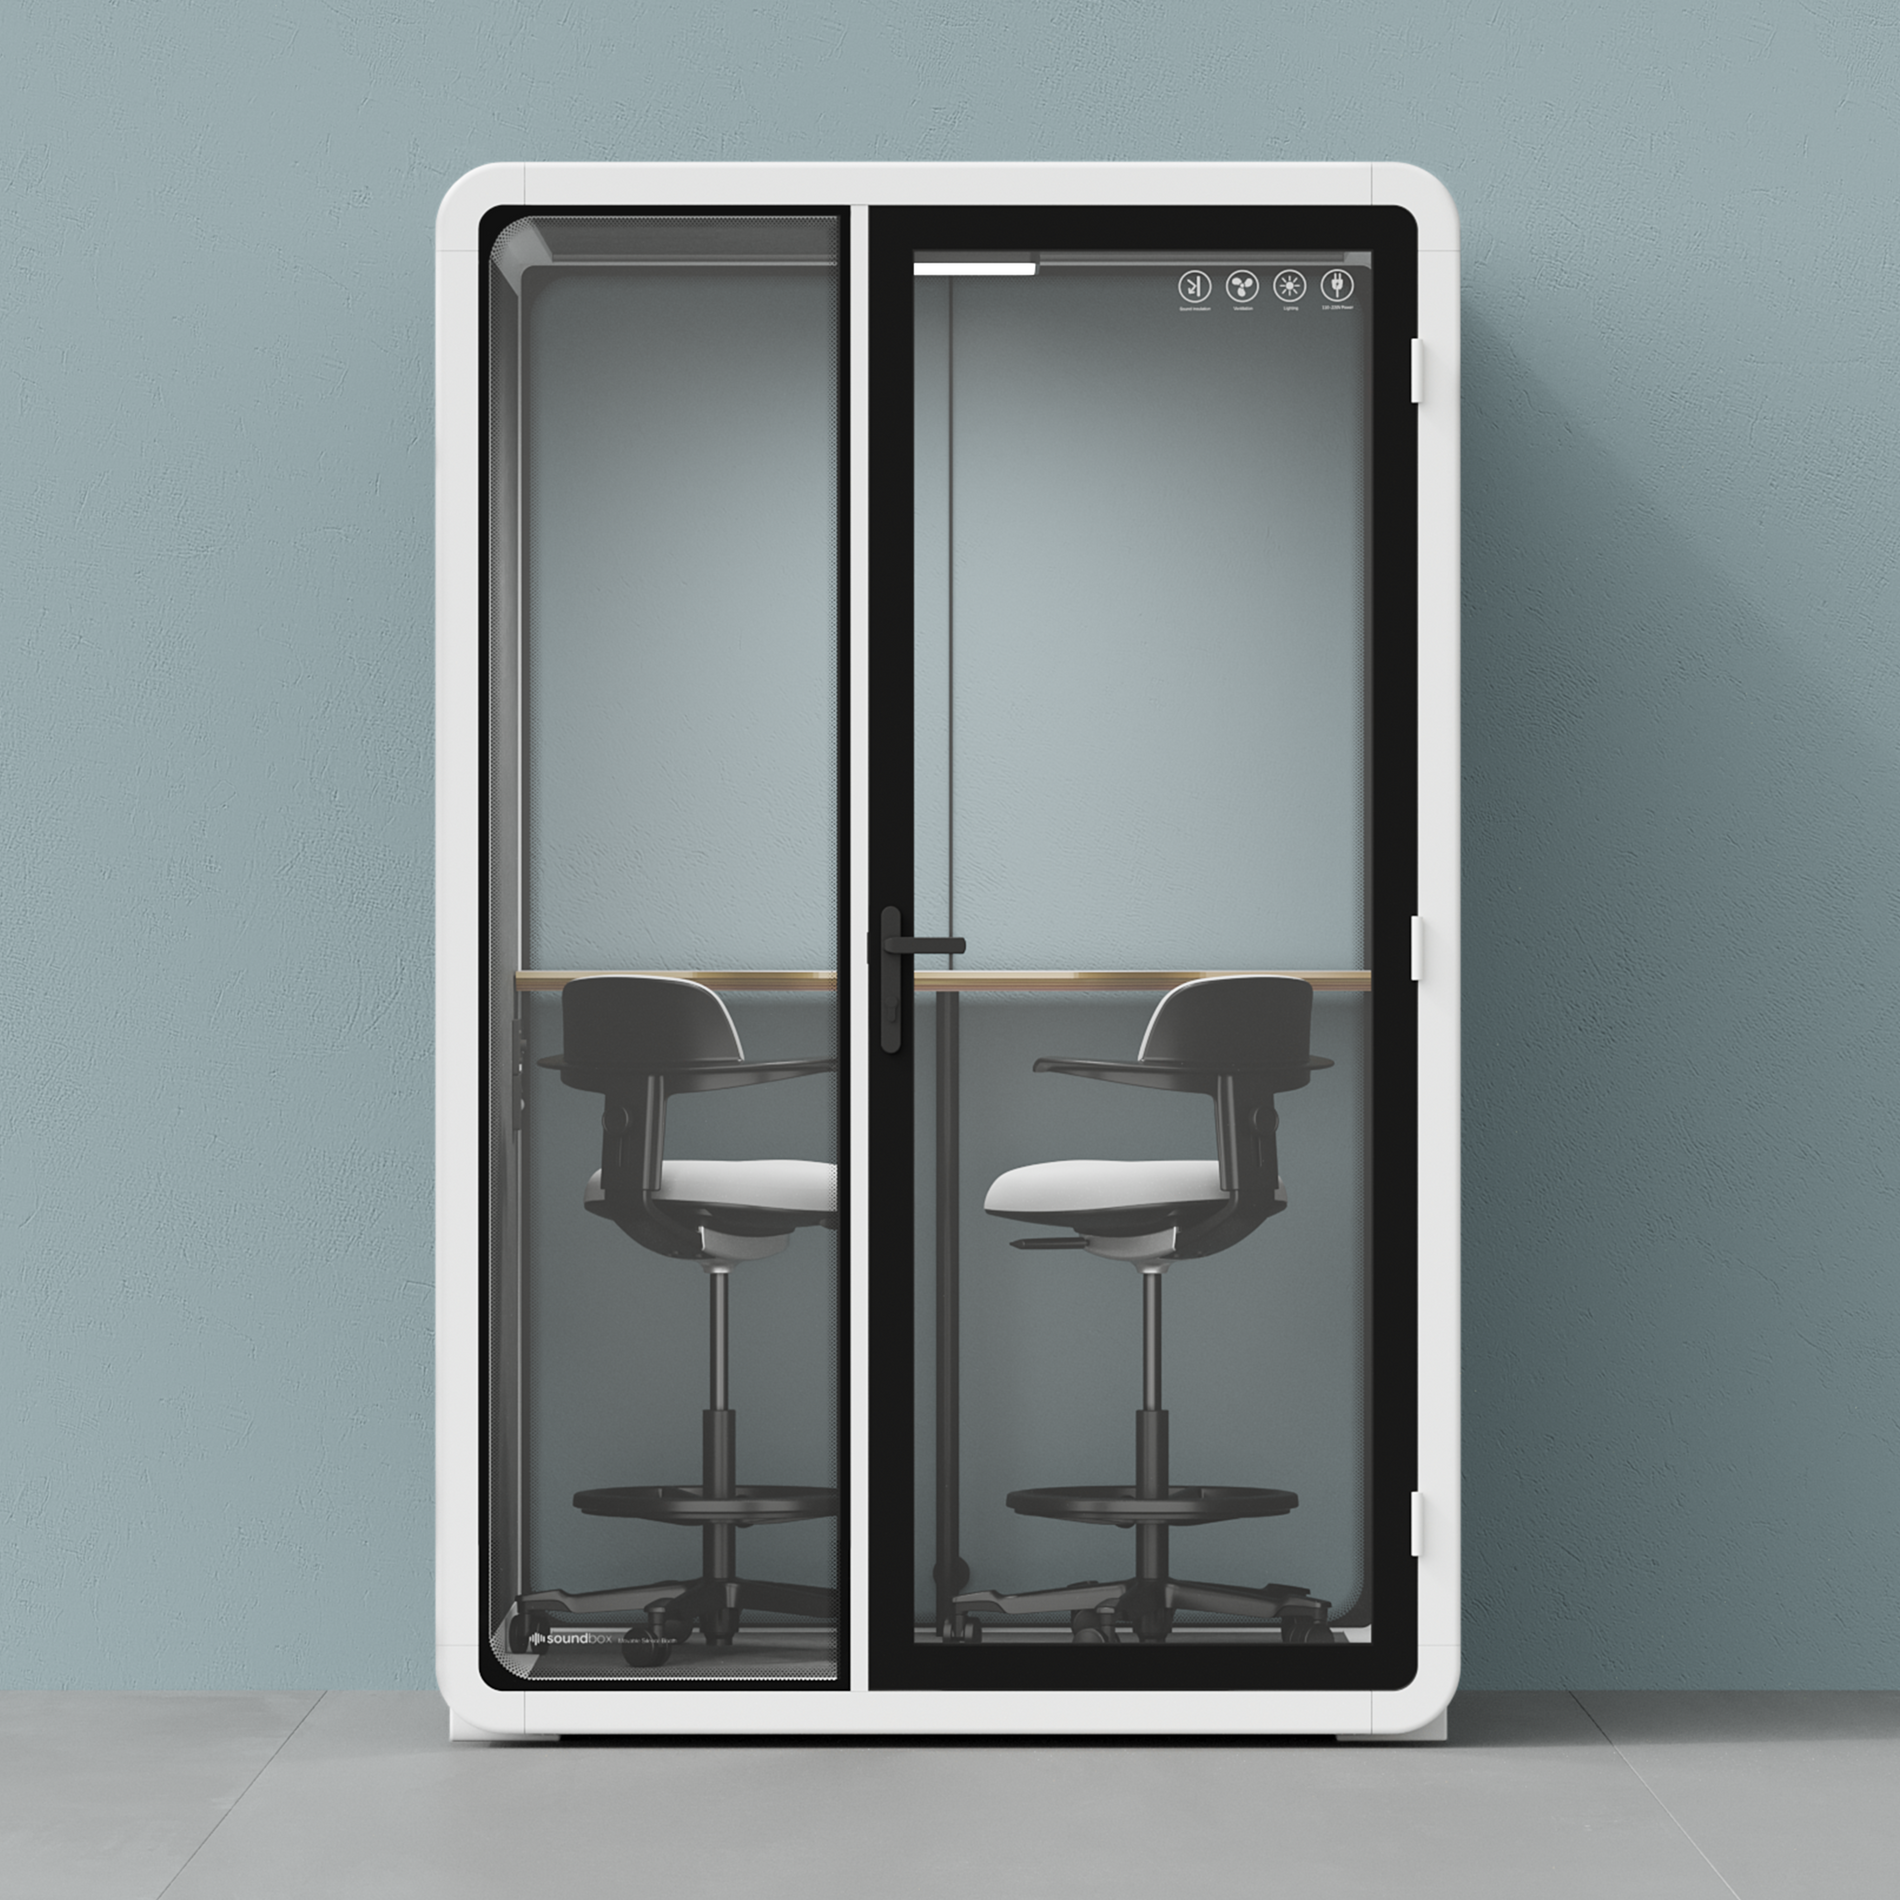 Quell - CoWorker - Pod 2 personnesWhite / Dark Gray / Dual Zoom Room + Device Shelf + 2 Barstools